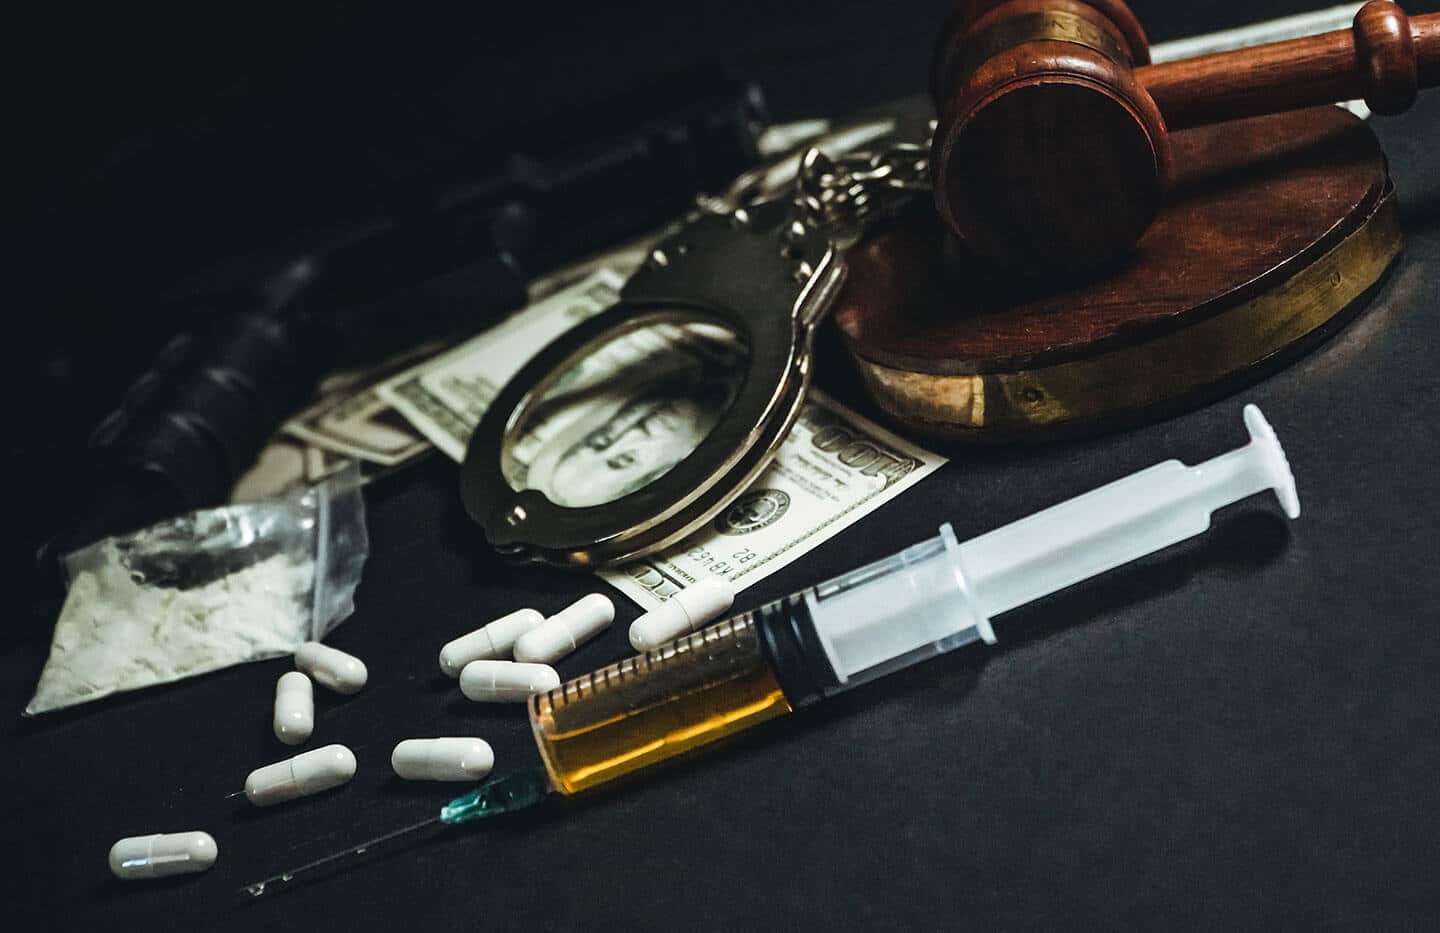 Potential Penalties for Drug Charges in the State of Texas